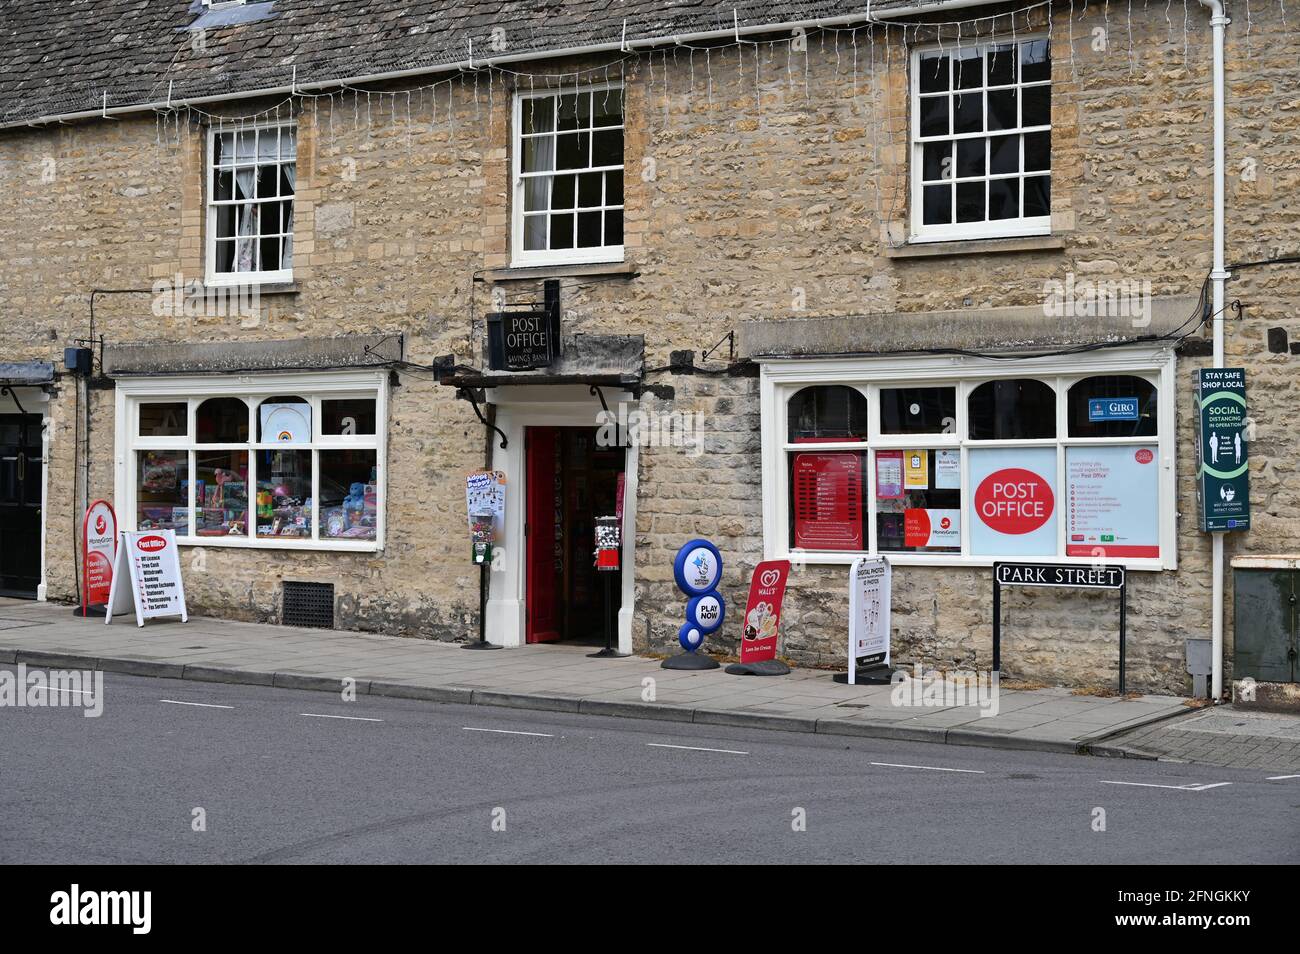 The Post Office and shop on Park Street in the north Oxfordshire town of Woodstock which is famouse for Blenheim Palace Stock Photo